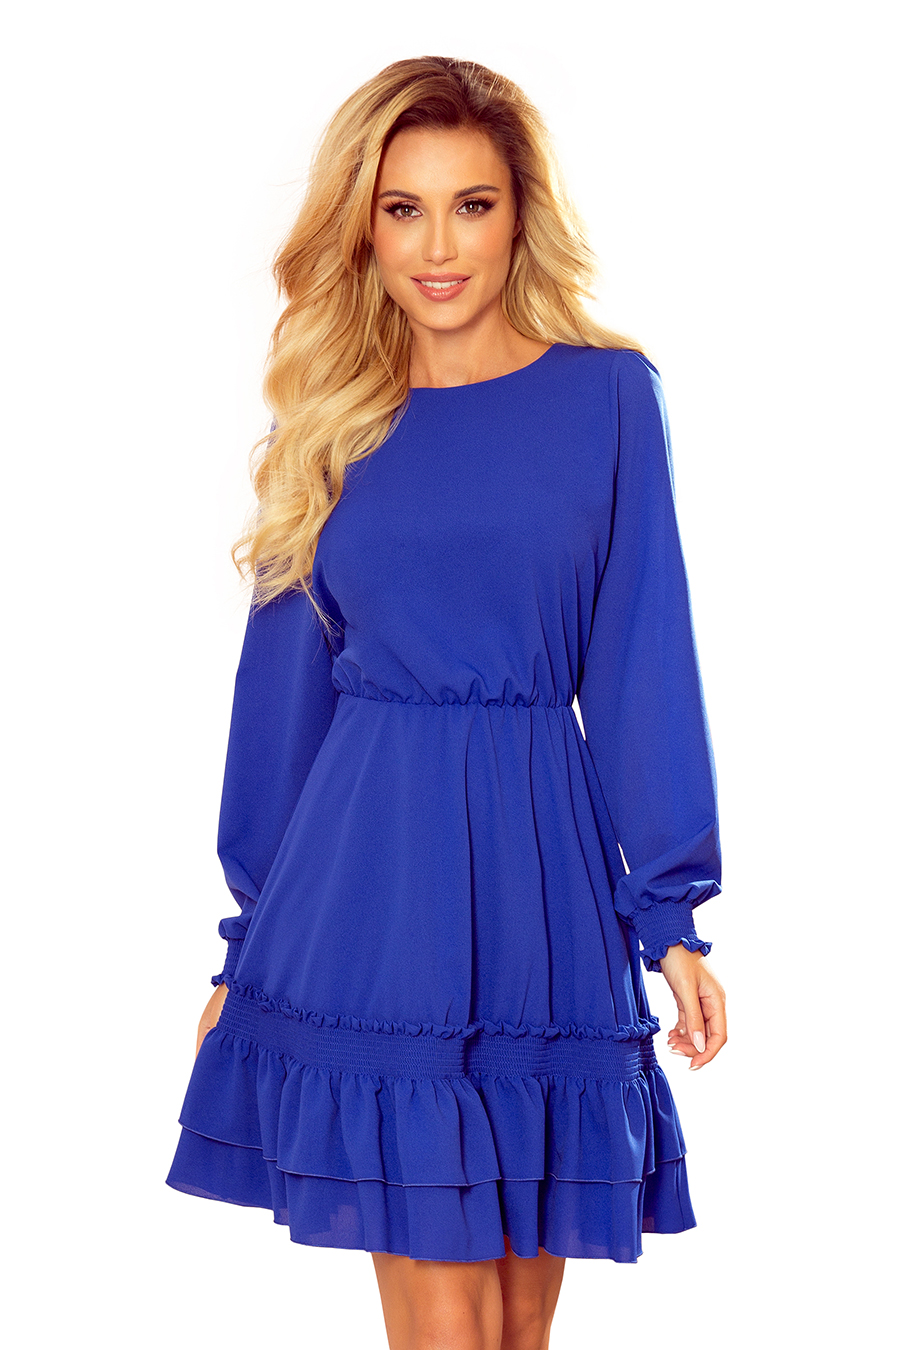 336-1 Chiffon dress with gathered elastic bands - classic blue 